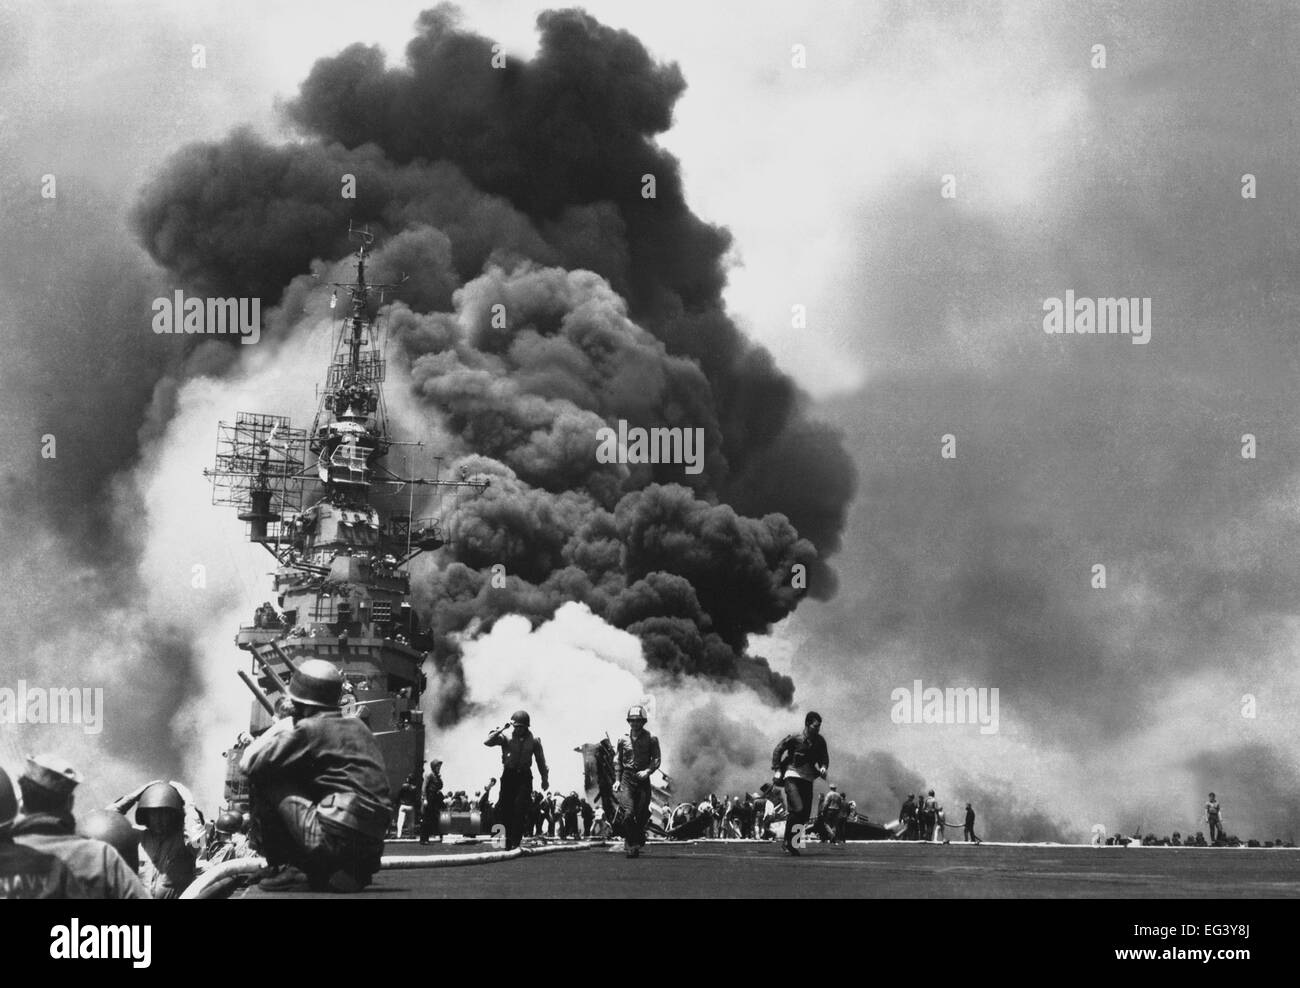 USS BUNKER HILL is hit by two Kamikazes in 30 seconds on 11 May 1945 off Kyushu Island in south east Japan. The strikes caused 372 deaths and 264 wounded. Photo US Navy Stock Photo